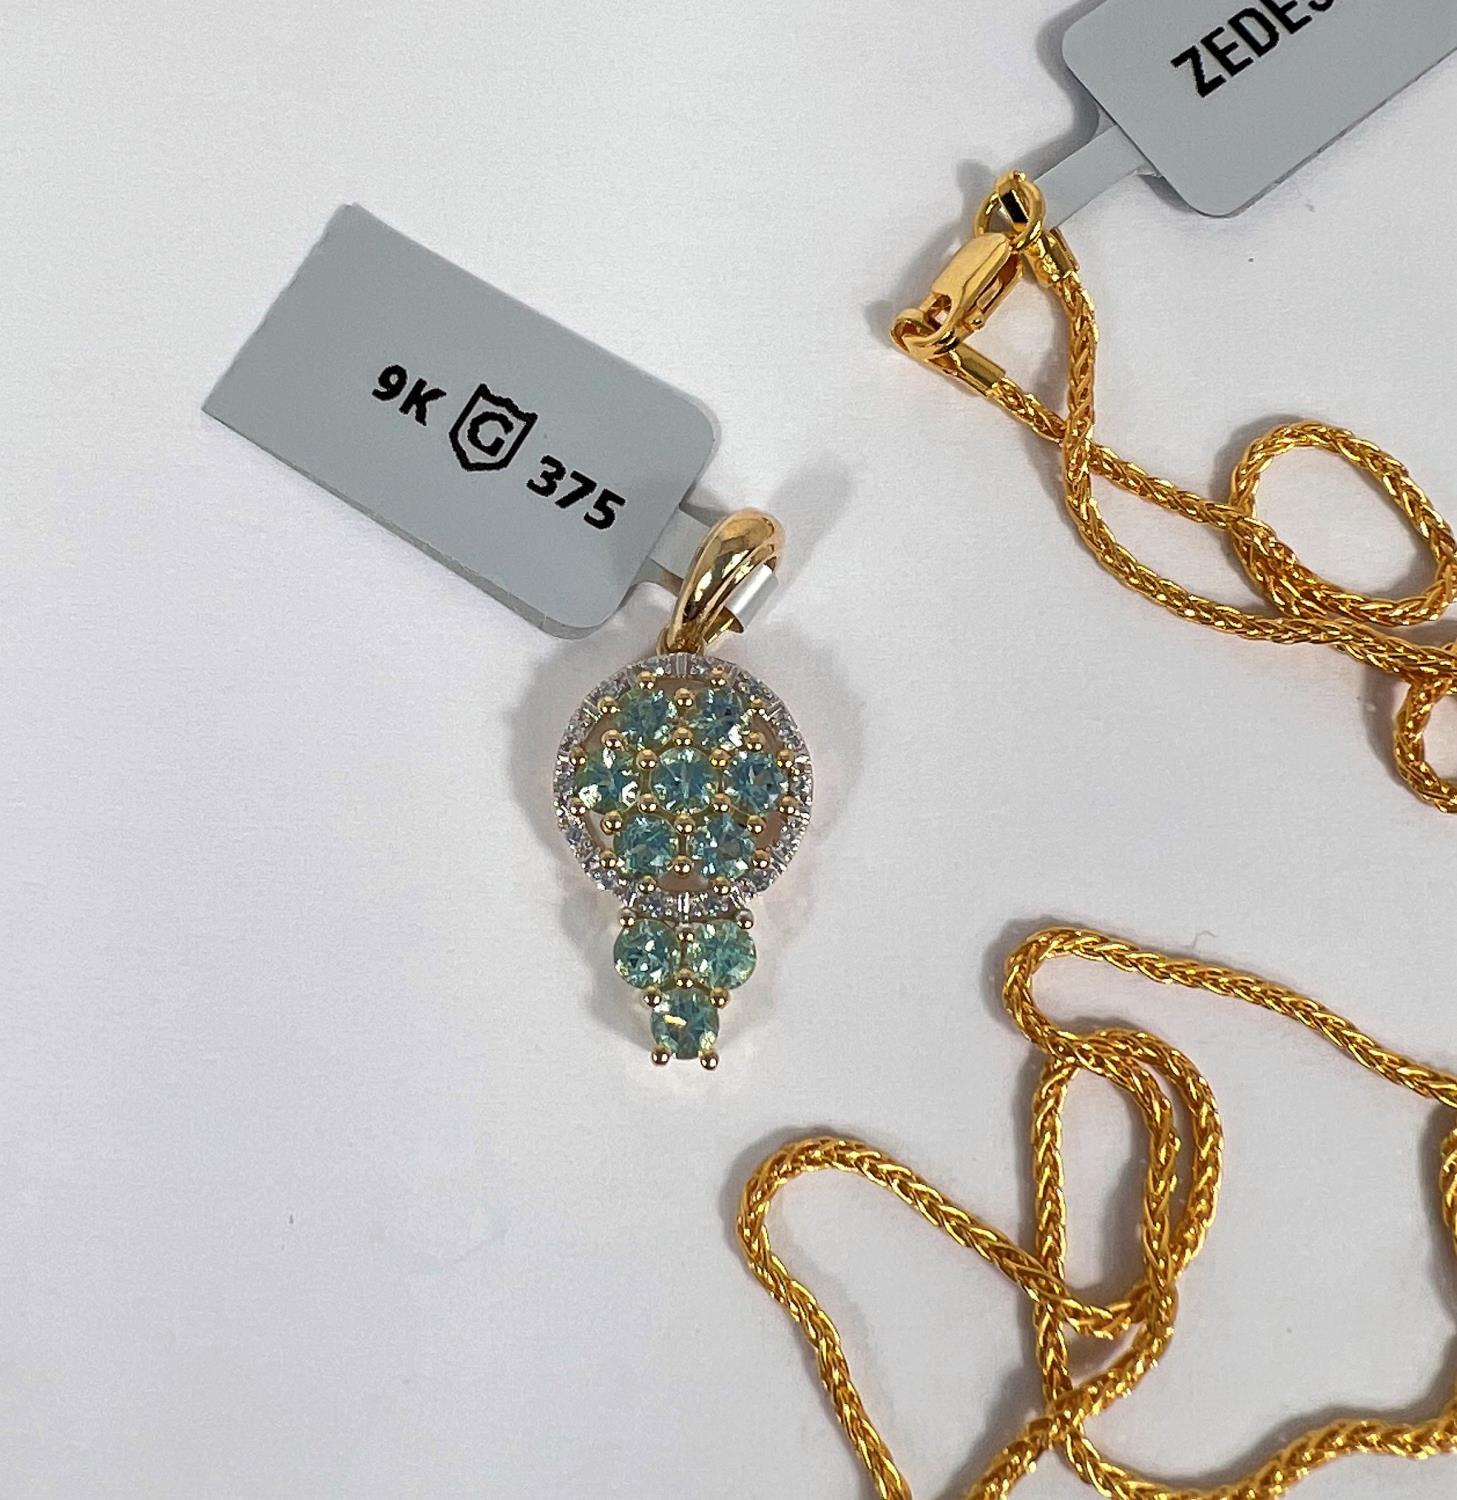 An Aquaiba Beryl pendant with white zircon chips in 9 k gold setting (10 Beryl stones approx.1 carat - Image 2 of 3